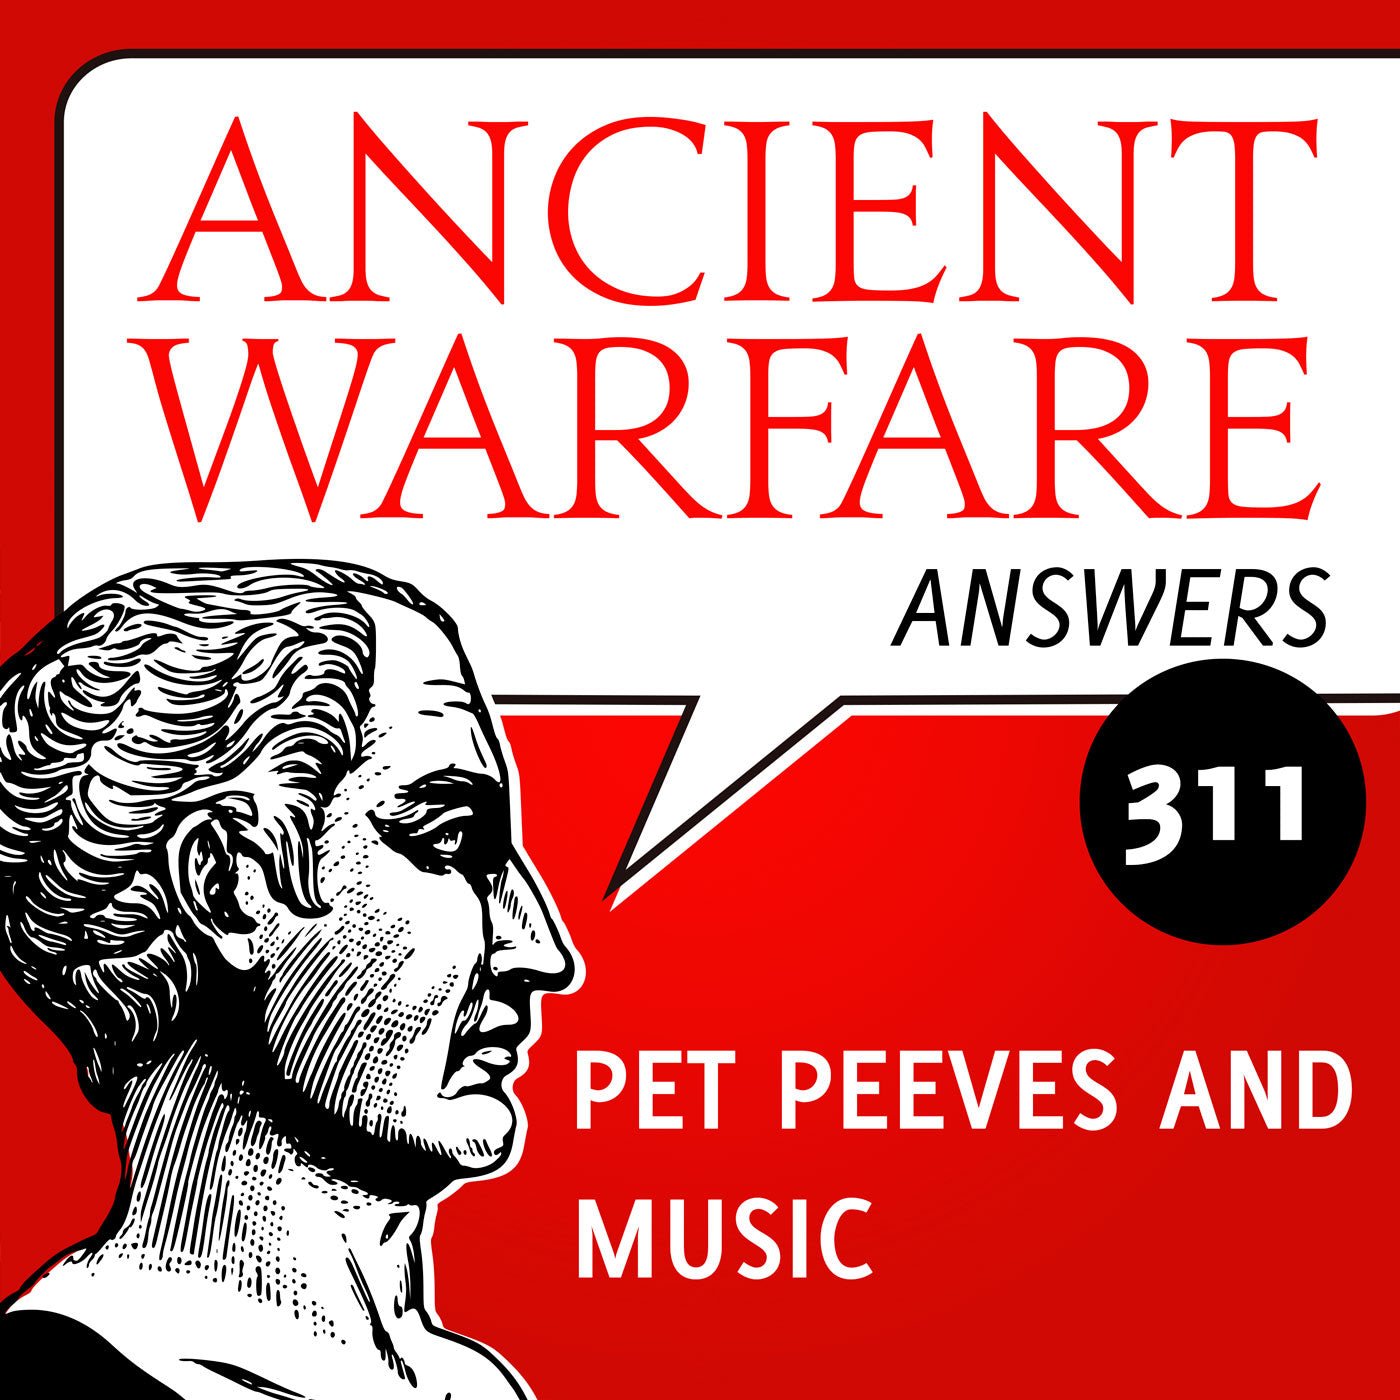 Ancient Warfare Answers (311): Pet Peeves and Music